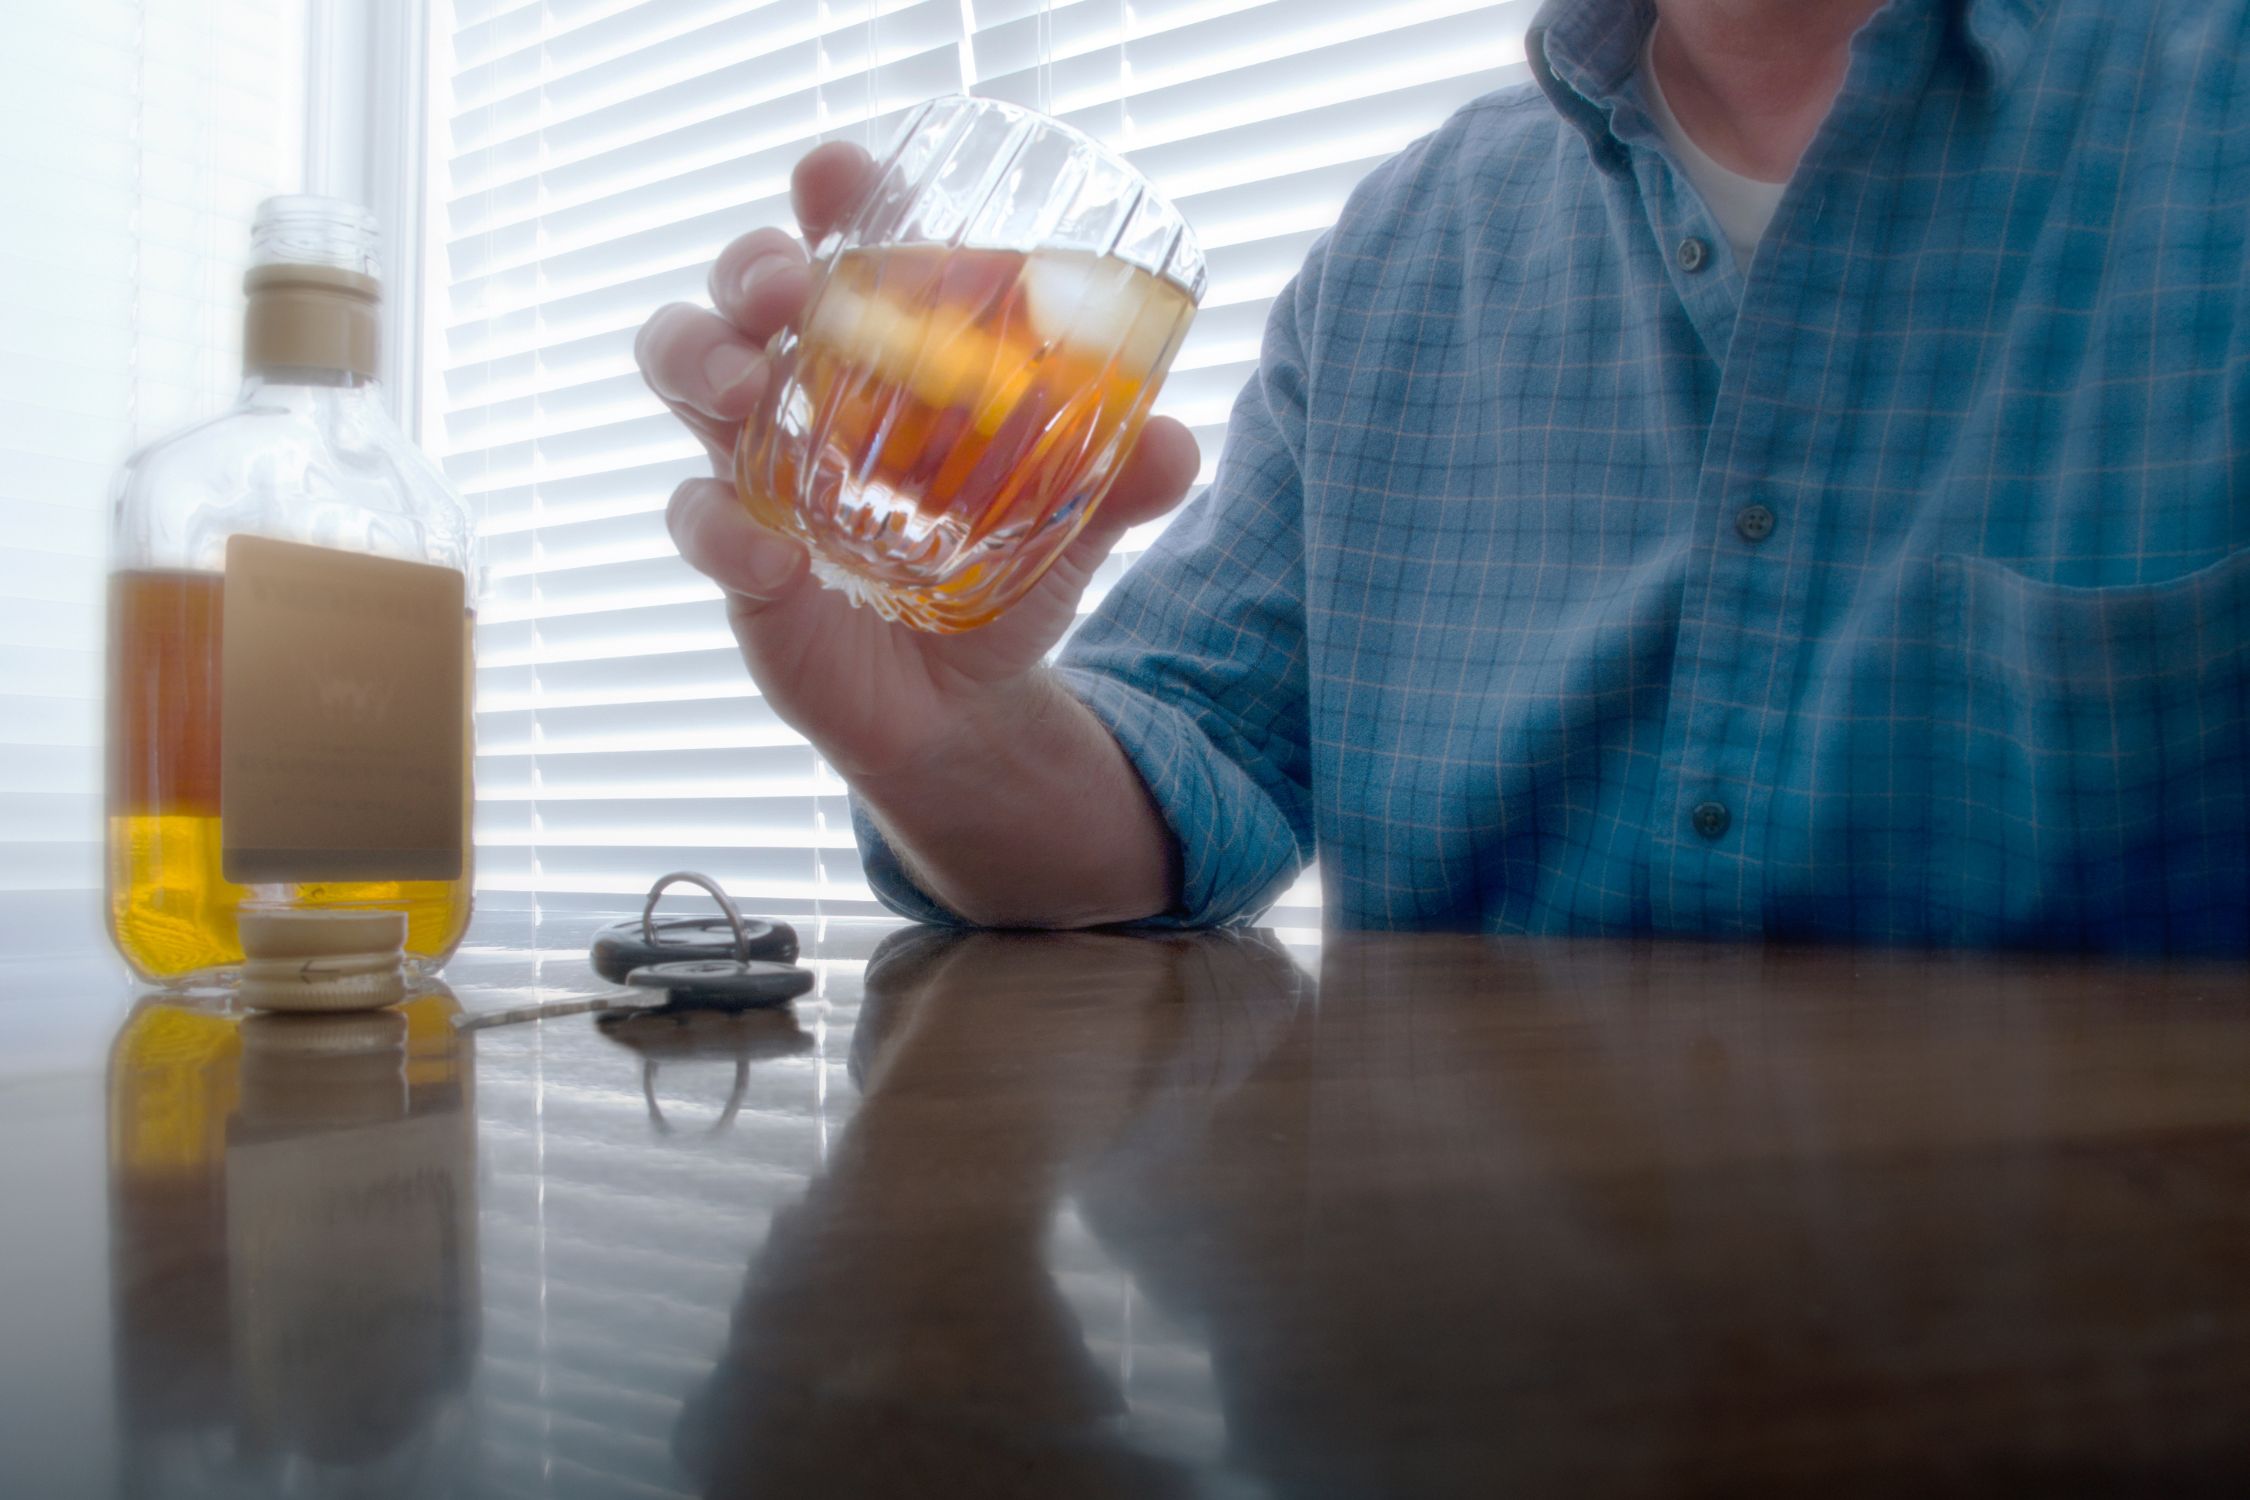 Alcohol and substance use can influence anger